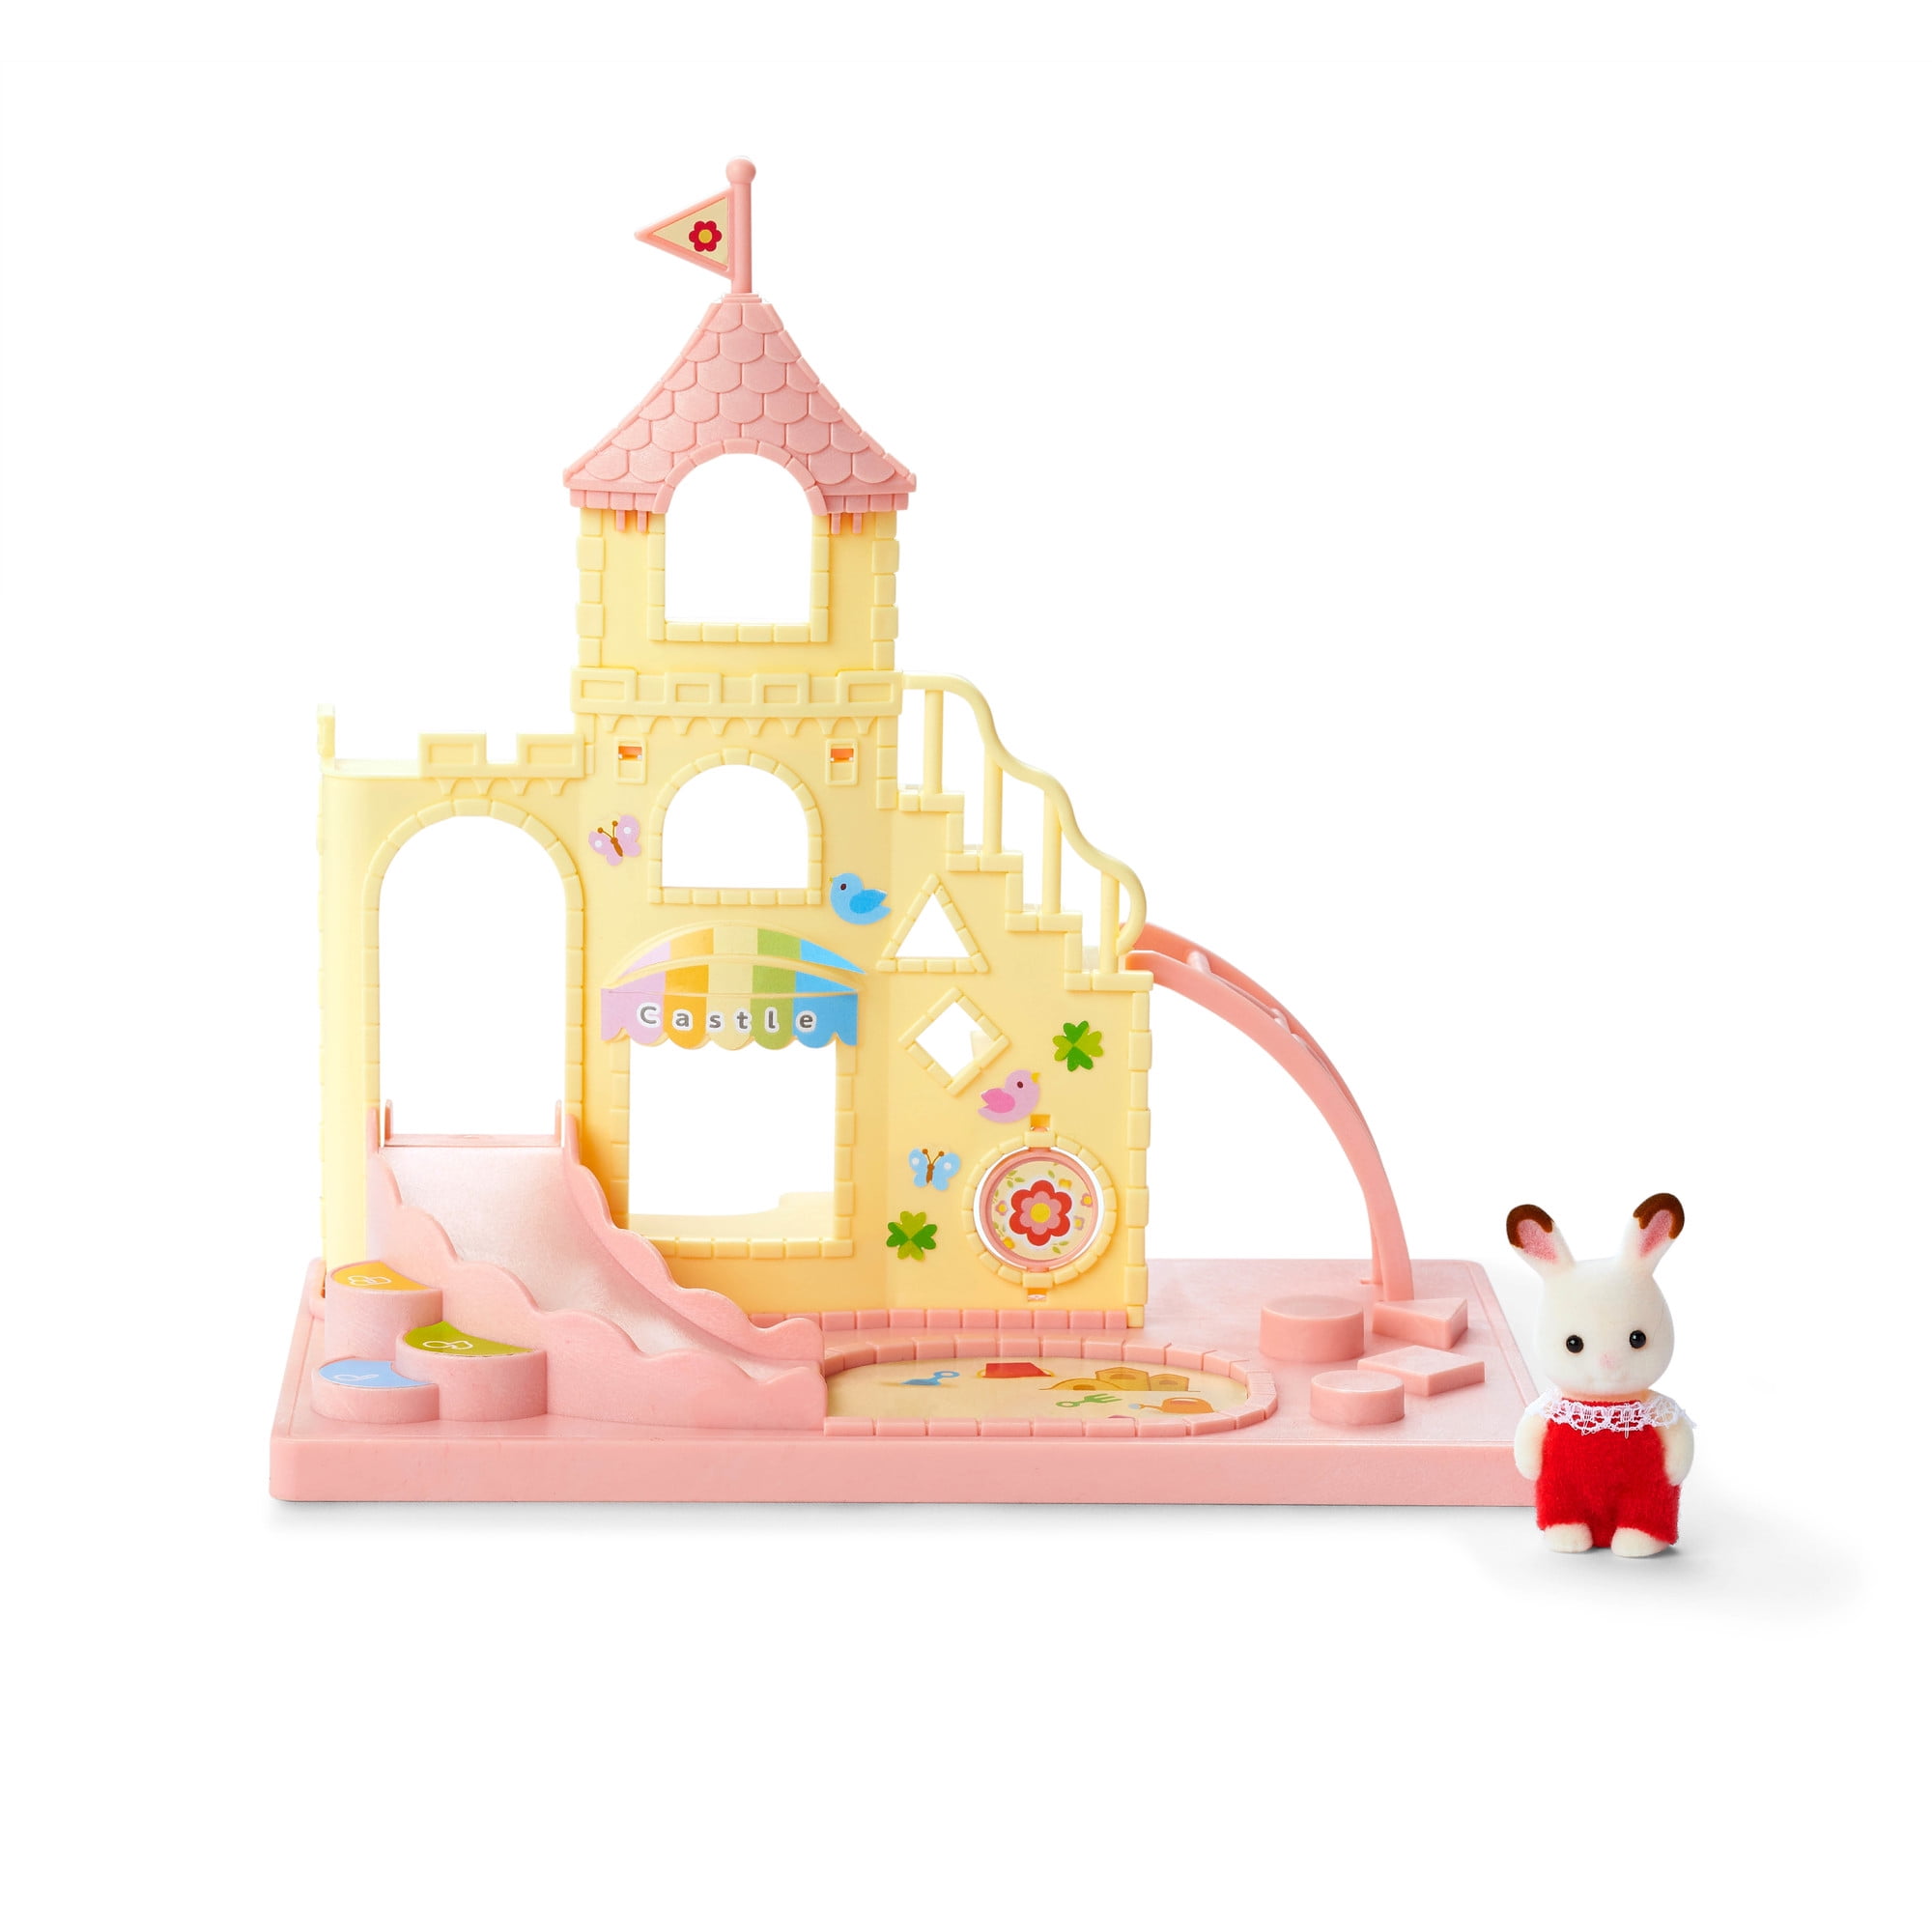 Calico Critters Baby Swing Set Sylvanian Families 